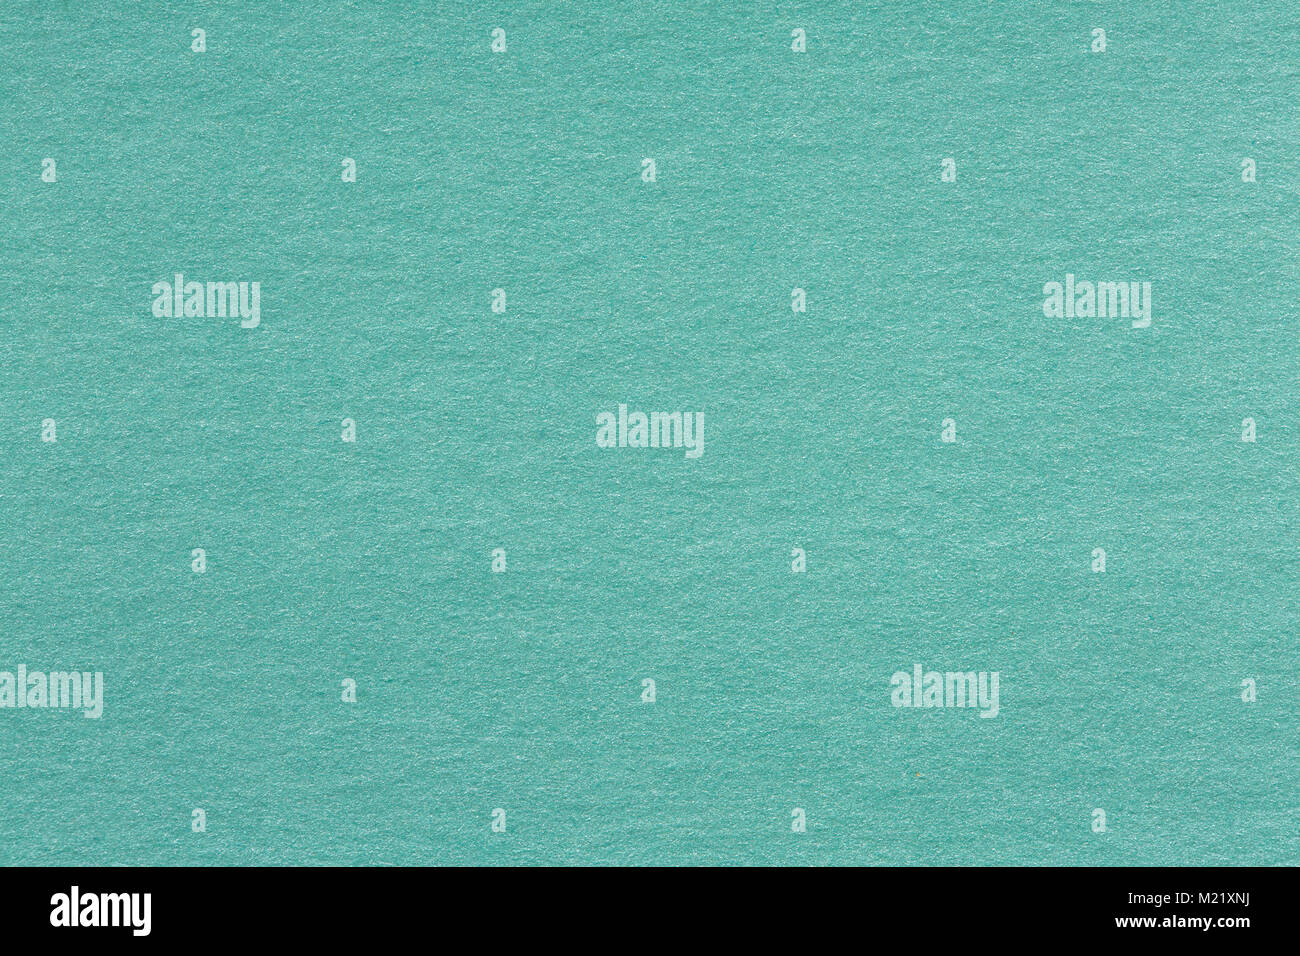 Recycled paper texture background in cyan turquoise teal aqua gr Stock Photo